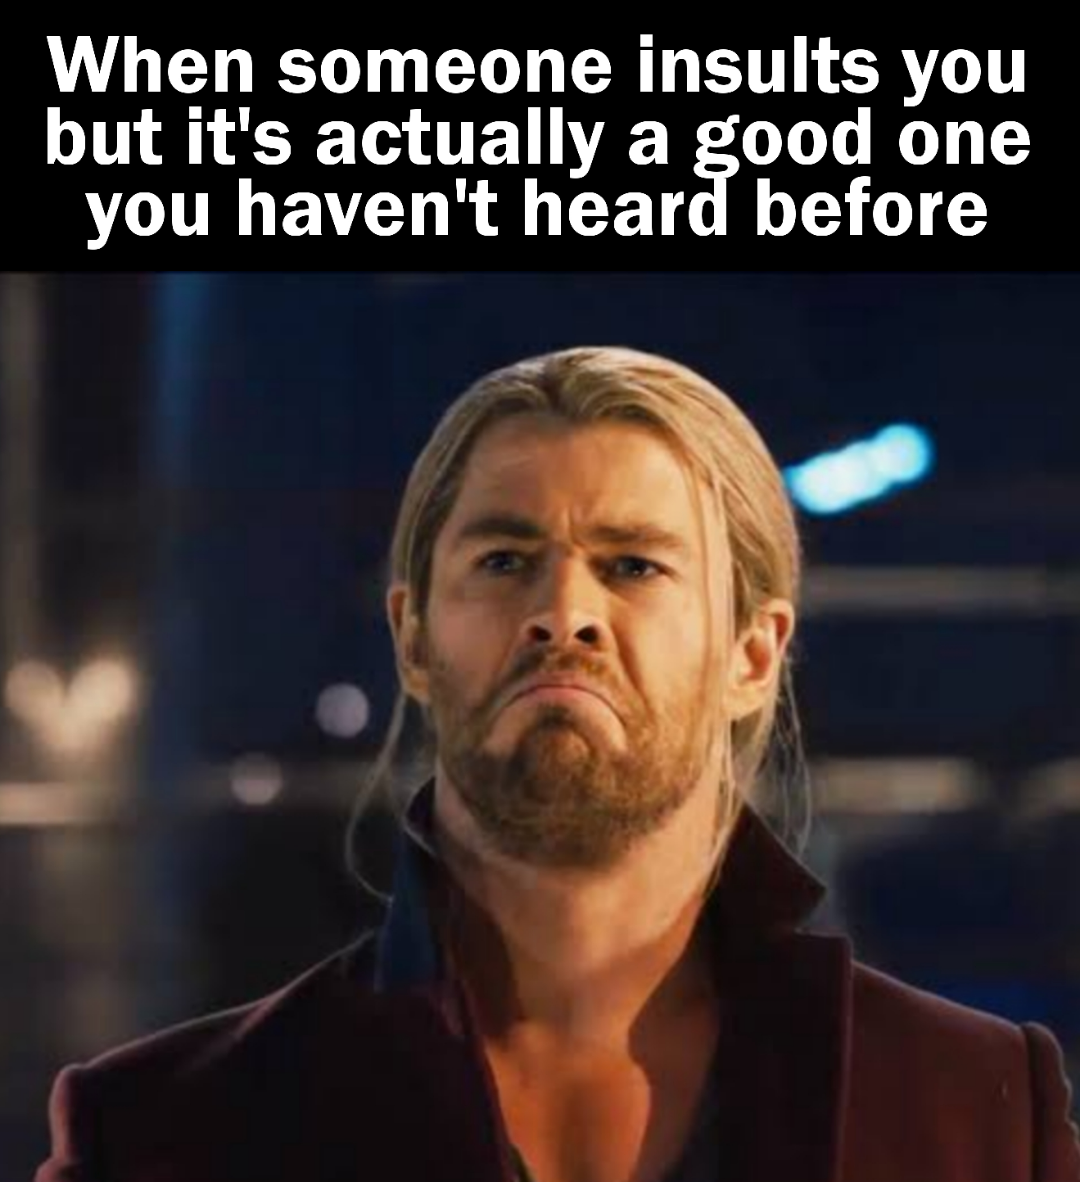 funny memes - Meme - When someone insults you but it's actually a good one you haven't heard before